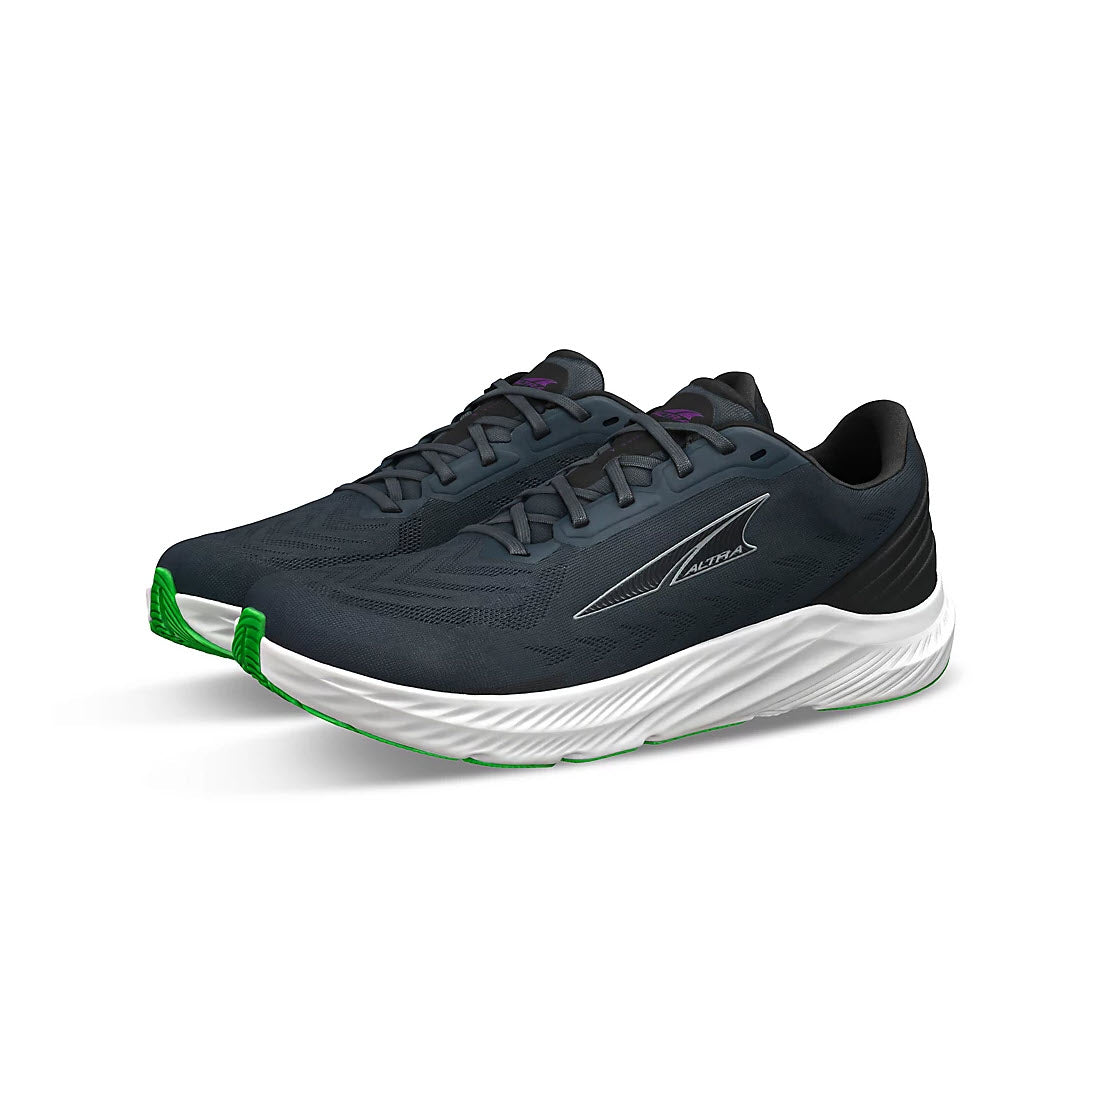 A pair of ALTRA RIVERA 4 BLACK - MENS running shoes with a responsive midsole cushion, white soles, and green accents on the heel, isolated on a white background.